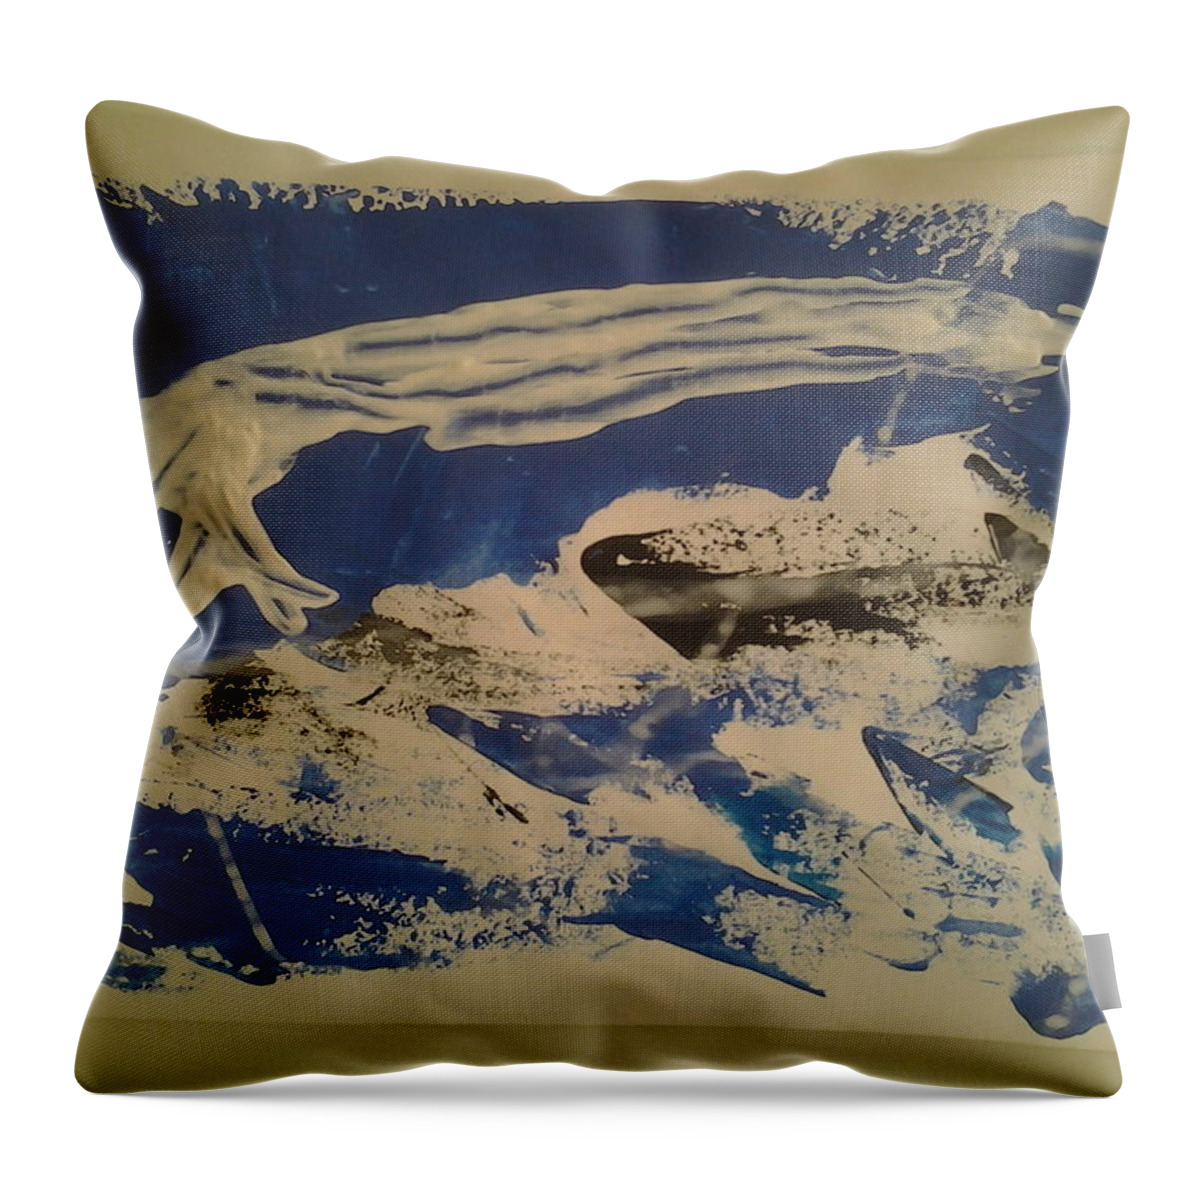  Throw Pillow featuring the painting Caos38 by Giuseppe Monti